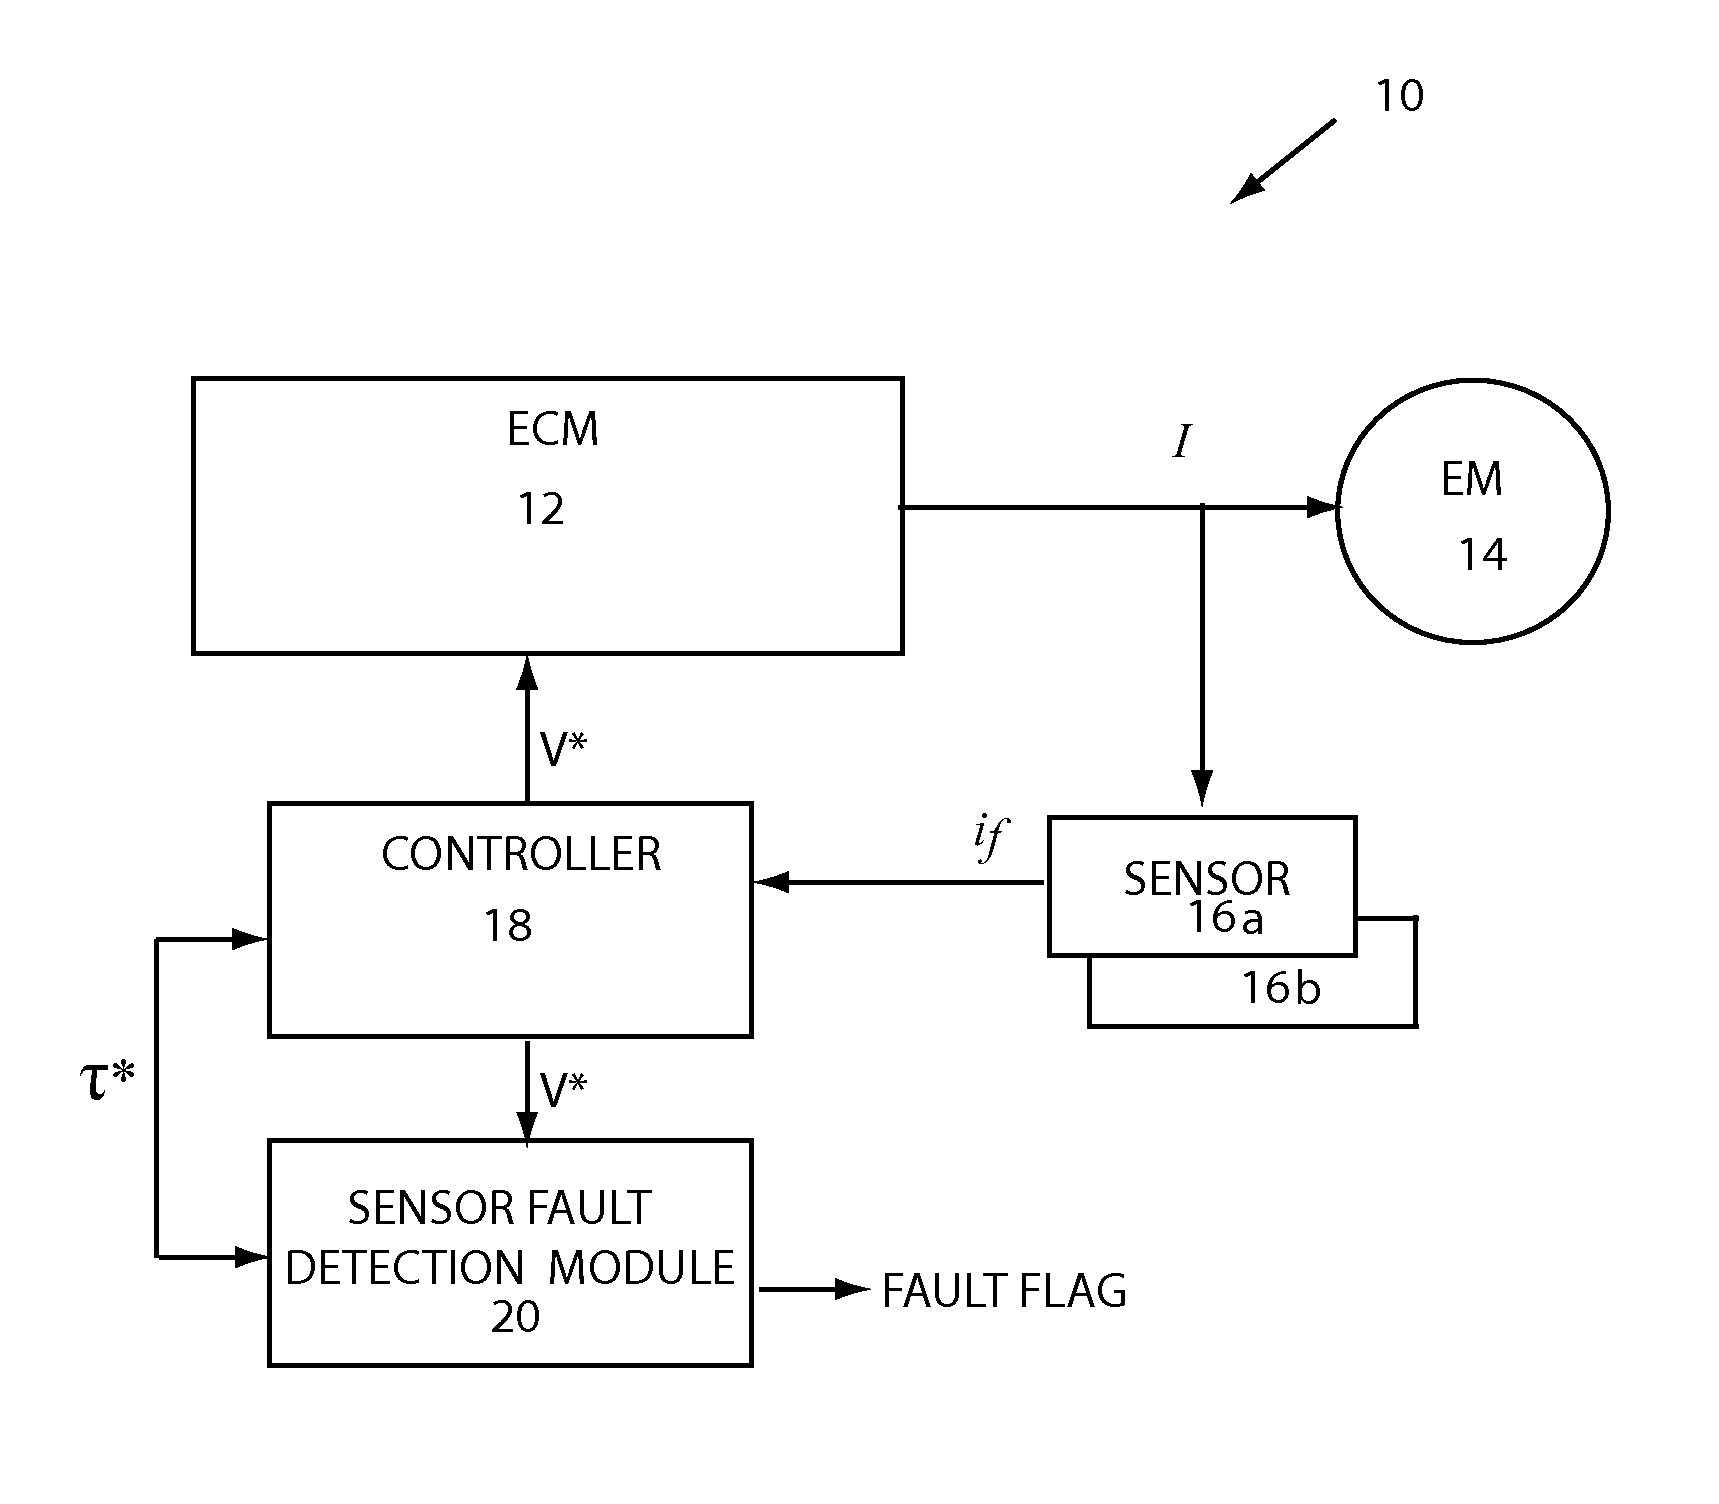 Detection method of current sensor faults in the e-drive system by using the voltage command error